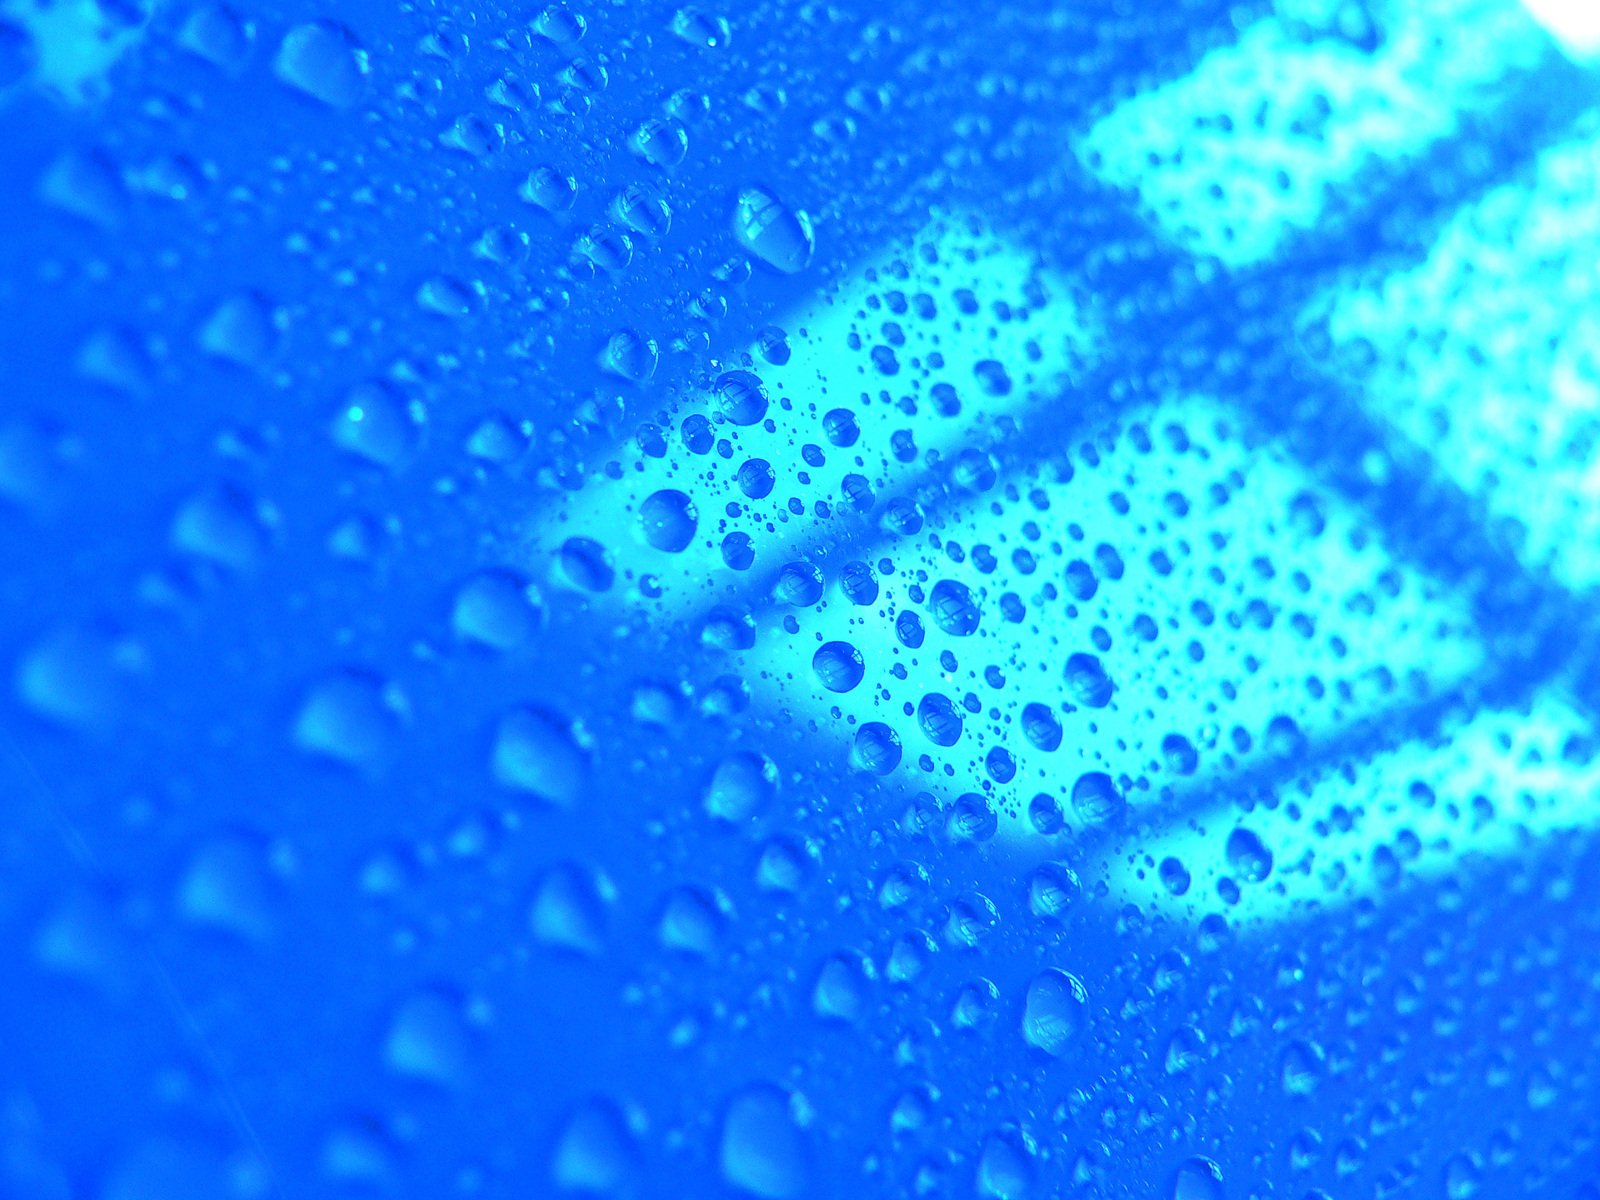 rain drops cover the top of a blue car with an image of a pedestrian sign in the rain